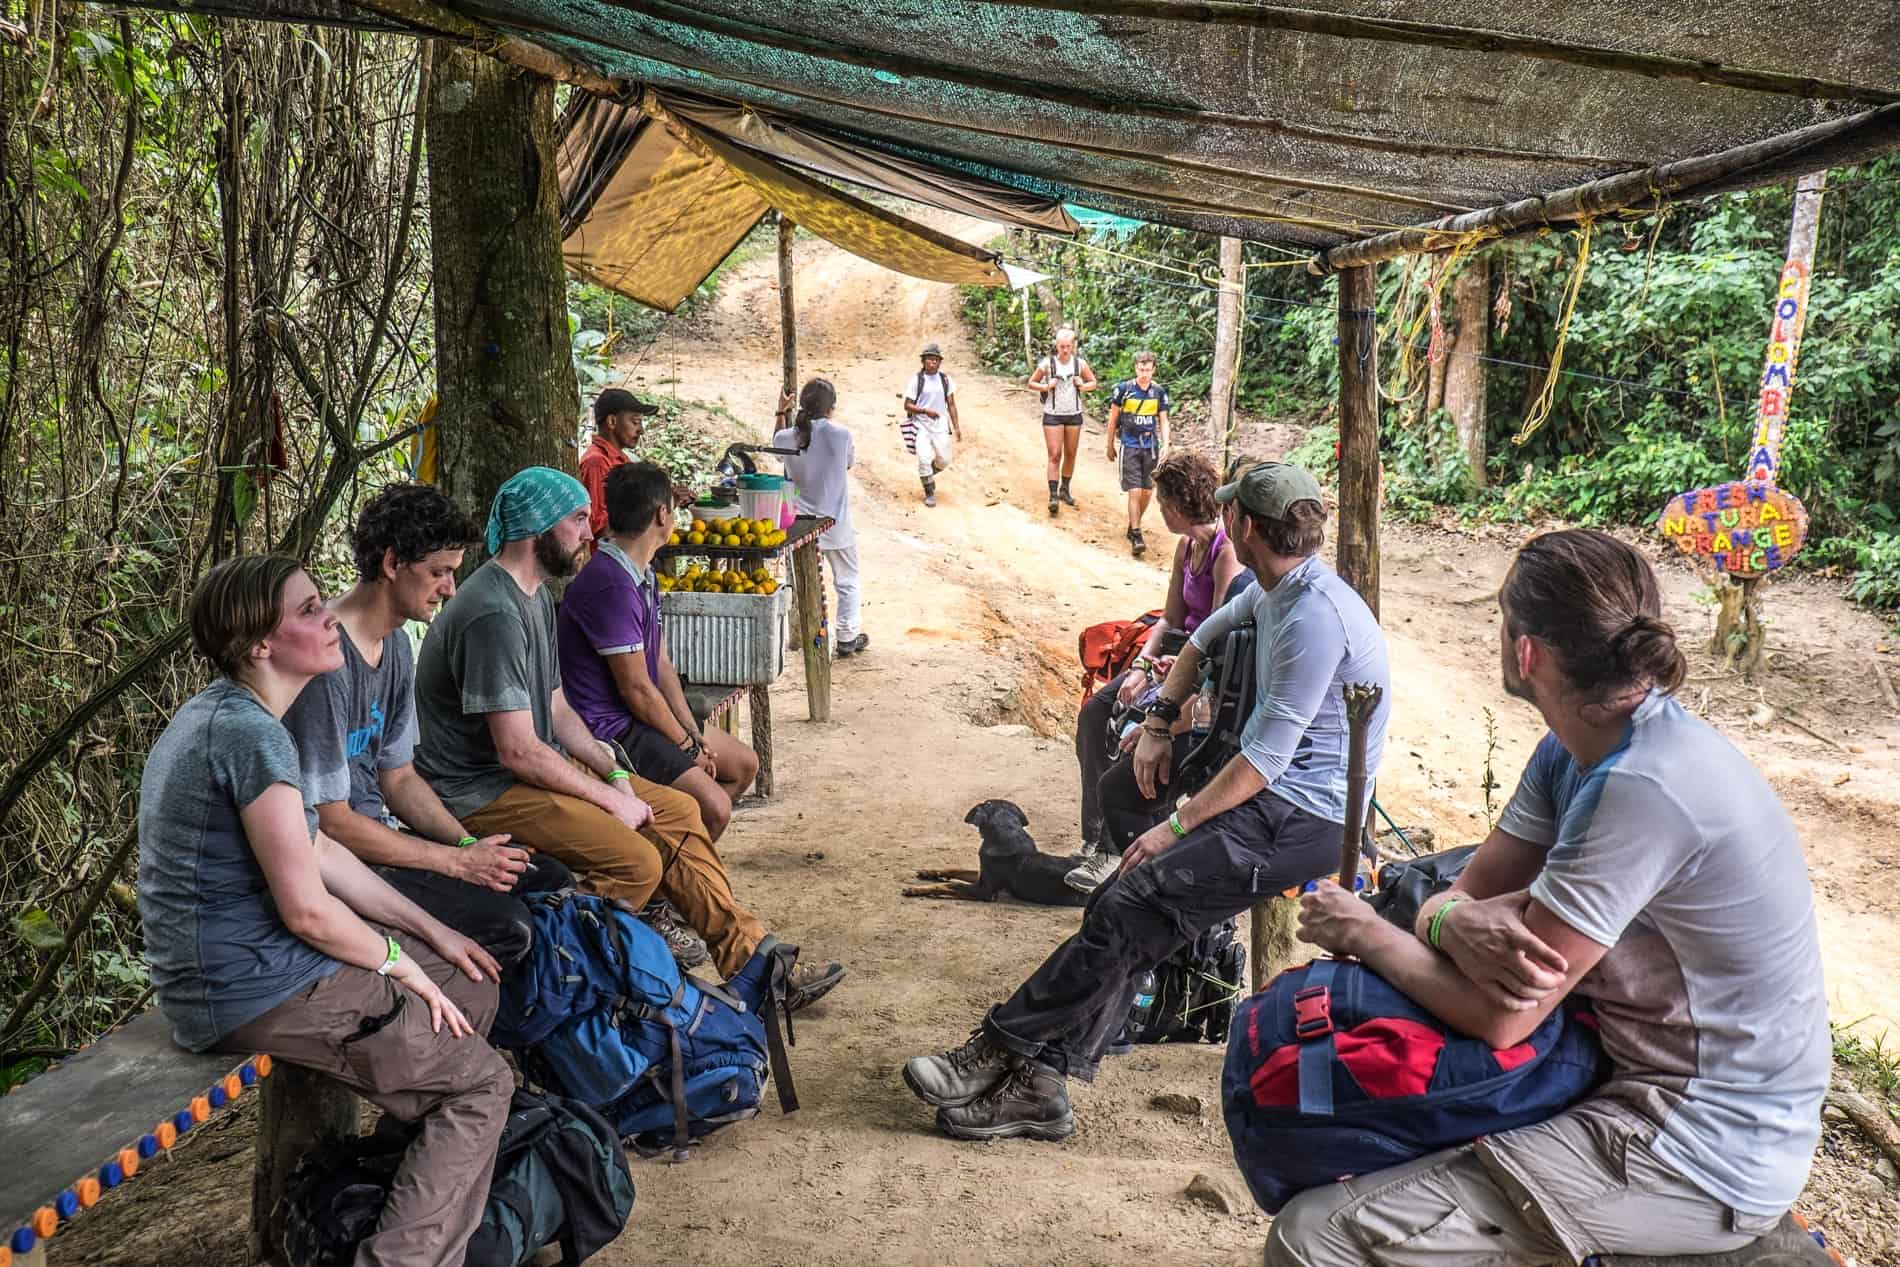 A trekking group rests at a local orange juice stand on the Lost City hike, Colombia.